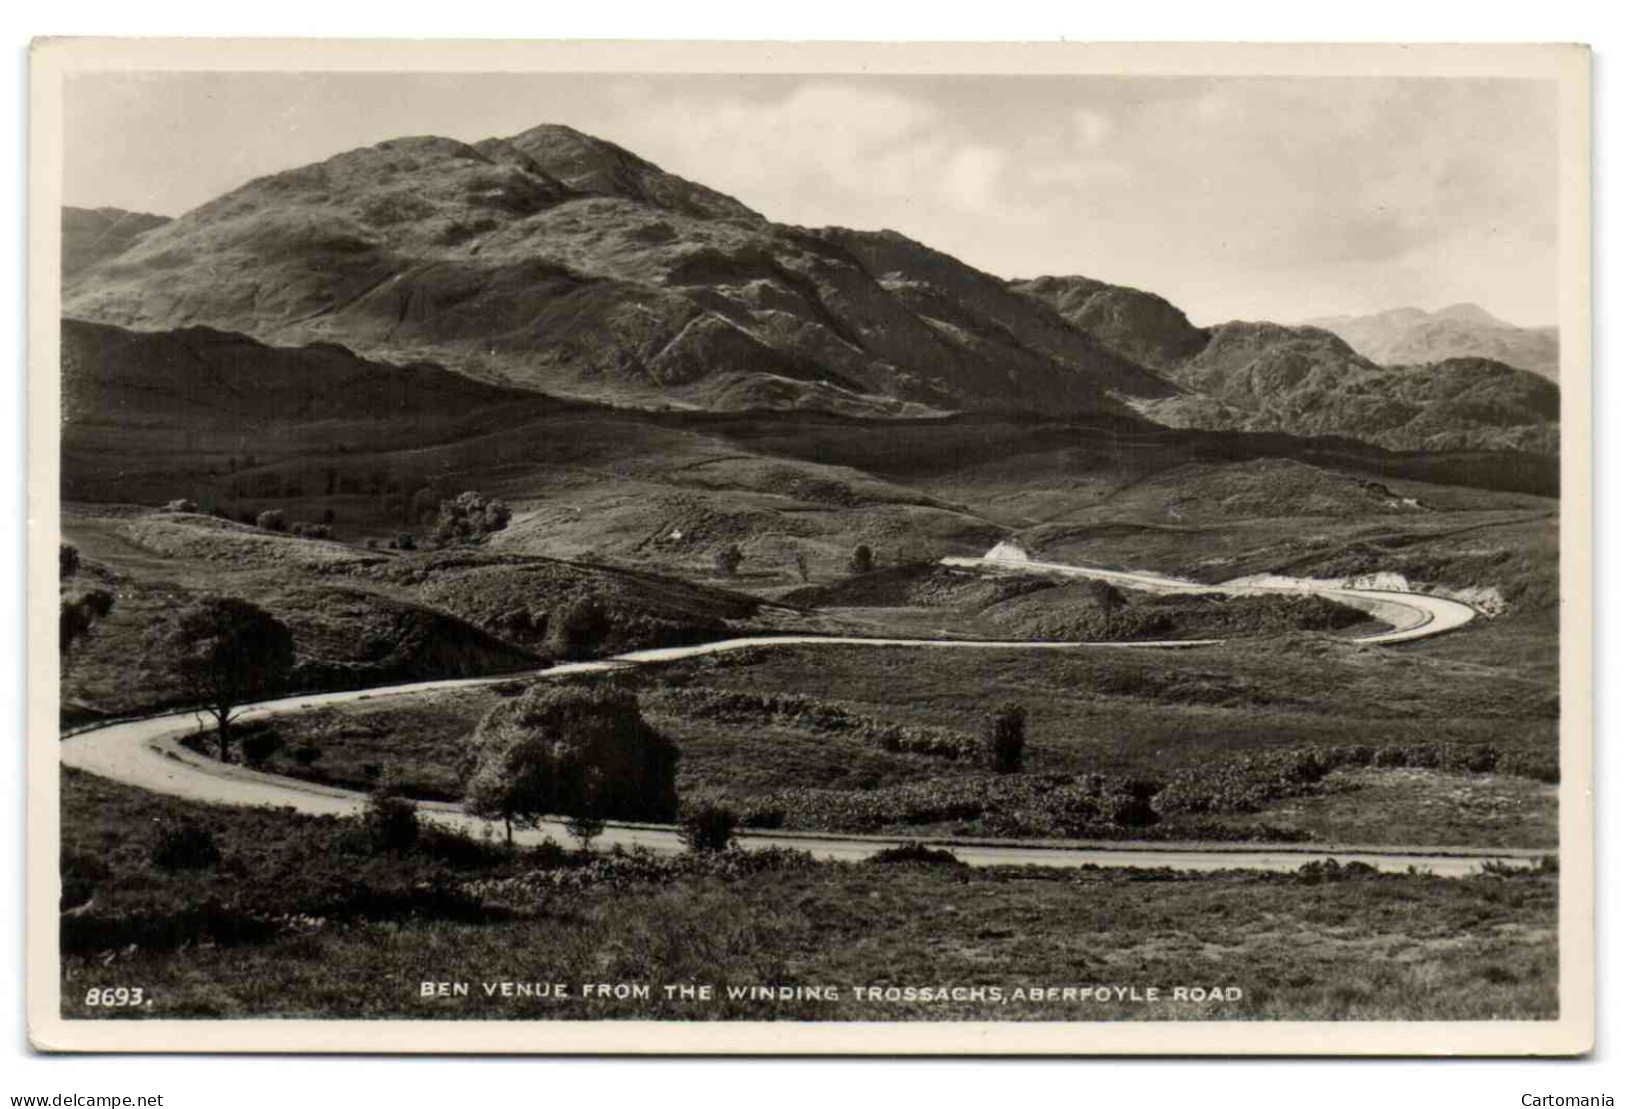 Ben Venue From The Winding Trossachs, Aberfoyle Road - Perthshire